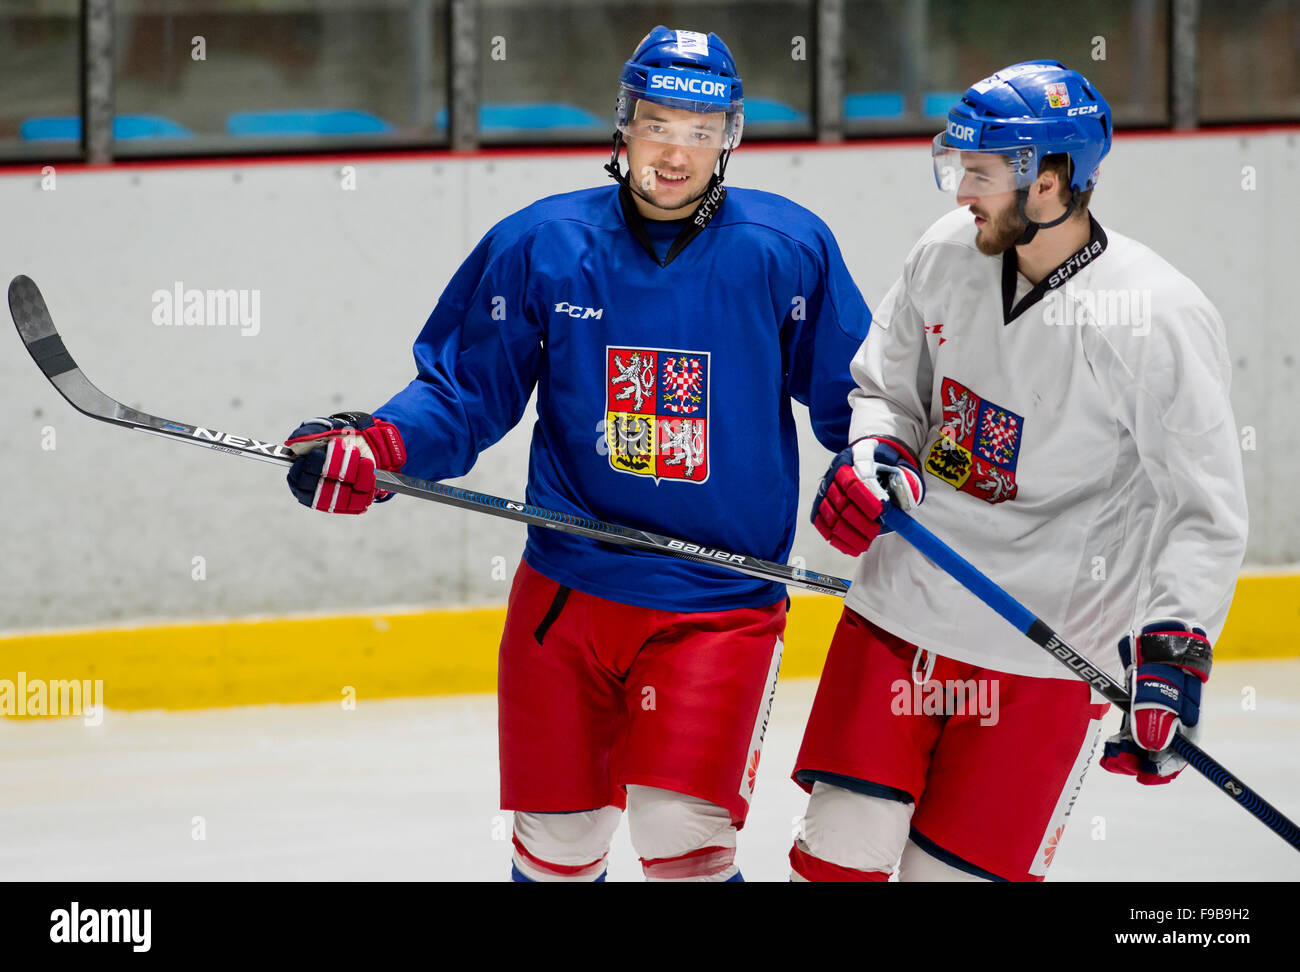 Prague, Czech Republic. 15th Dec, 2015. Czech hockey players jan Kovar (left) and Tomas Filippi during a training of Czech national ice hockey team prior to the Channel One Cup of the Euro Hockey Tour in Prague, Czech Republic, December 15, 2015. © Vit Simanek/CTK Photo/Alamy Live News Stock Photo